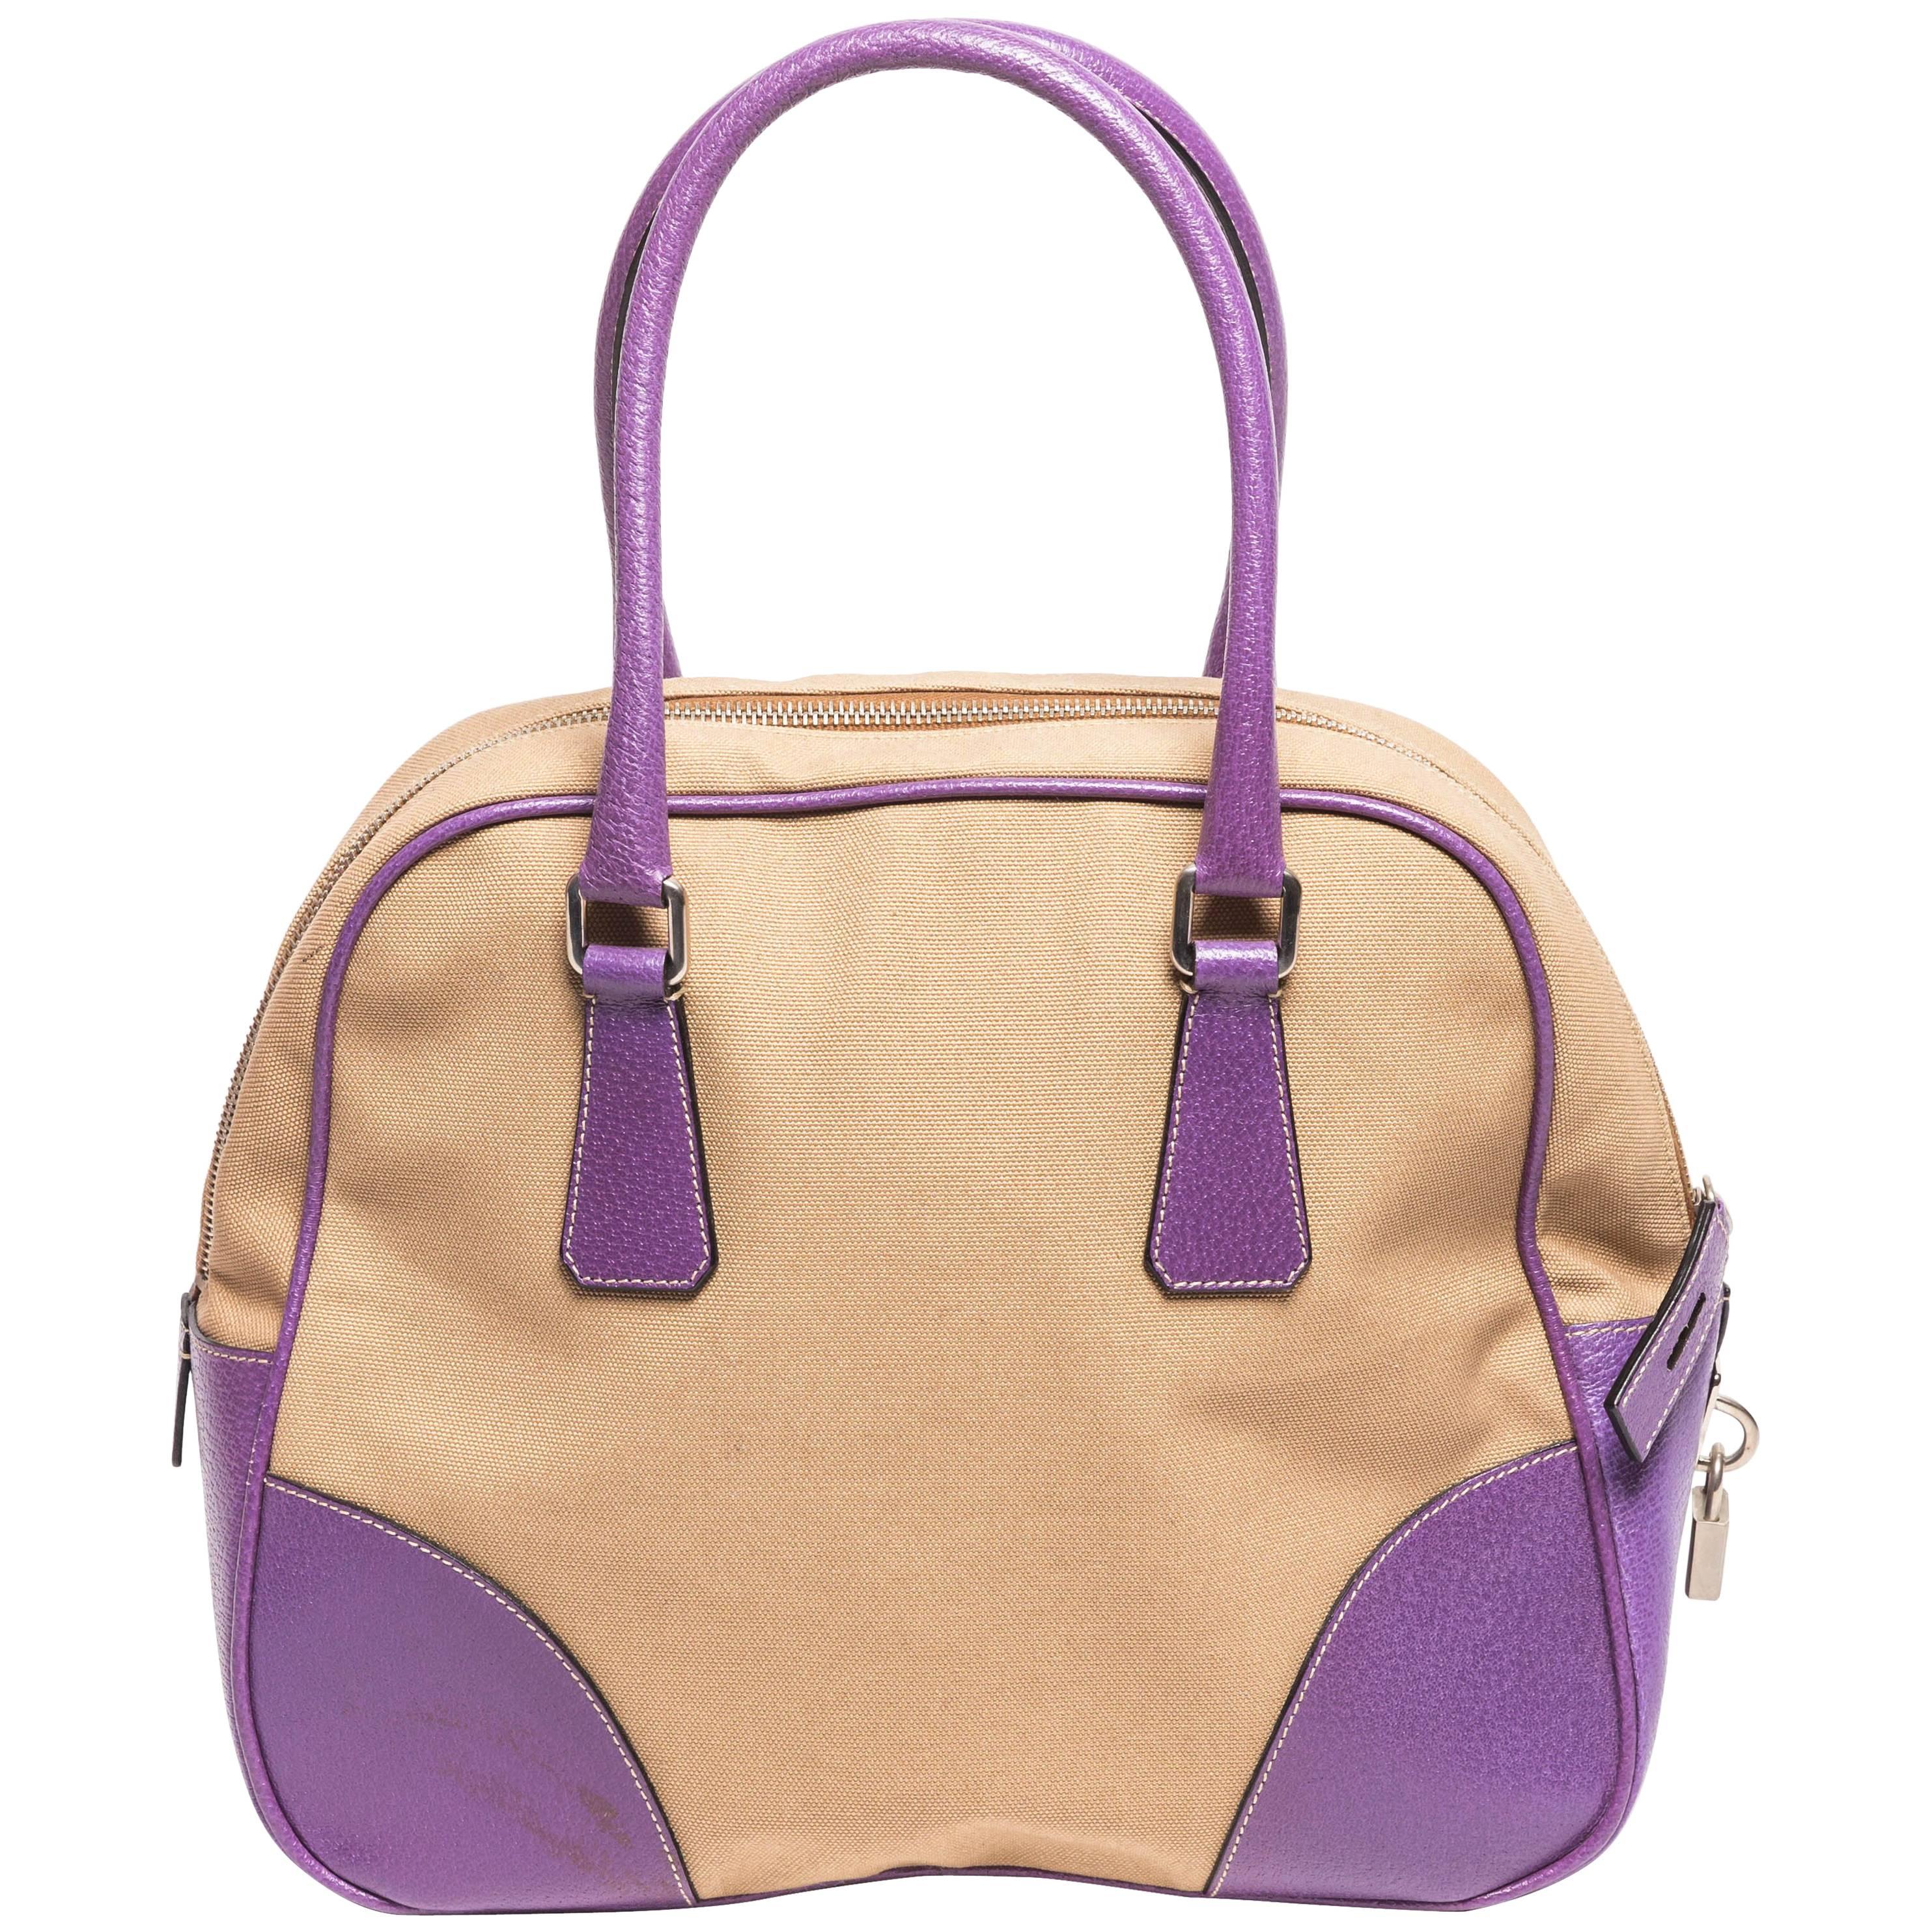 Prada Canvas and Purple Leather Top Handle Bag with Lock,  Keys and Luggage Tag For Sale